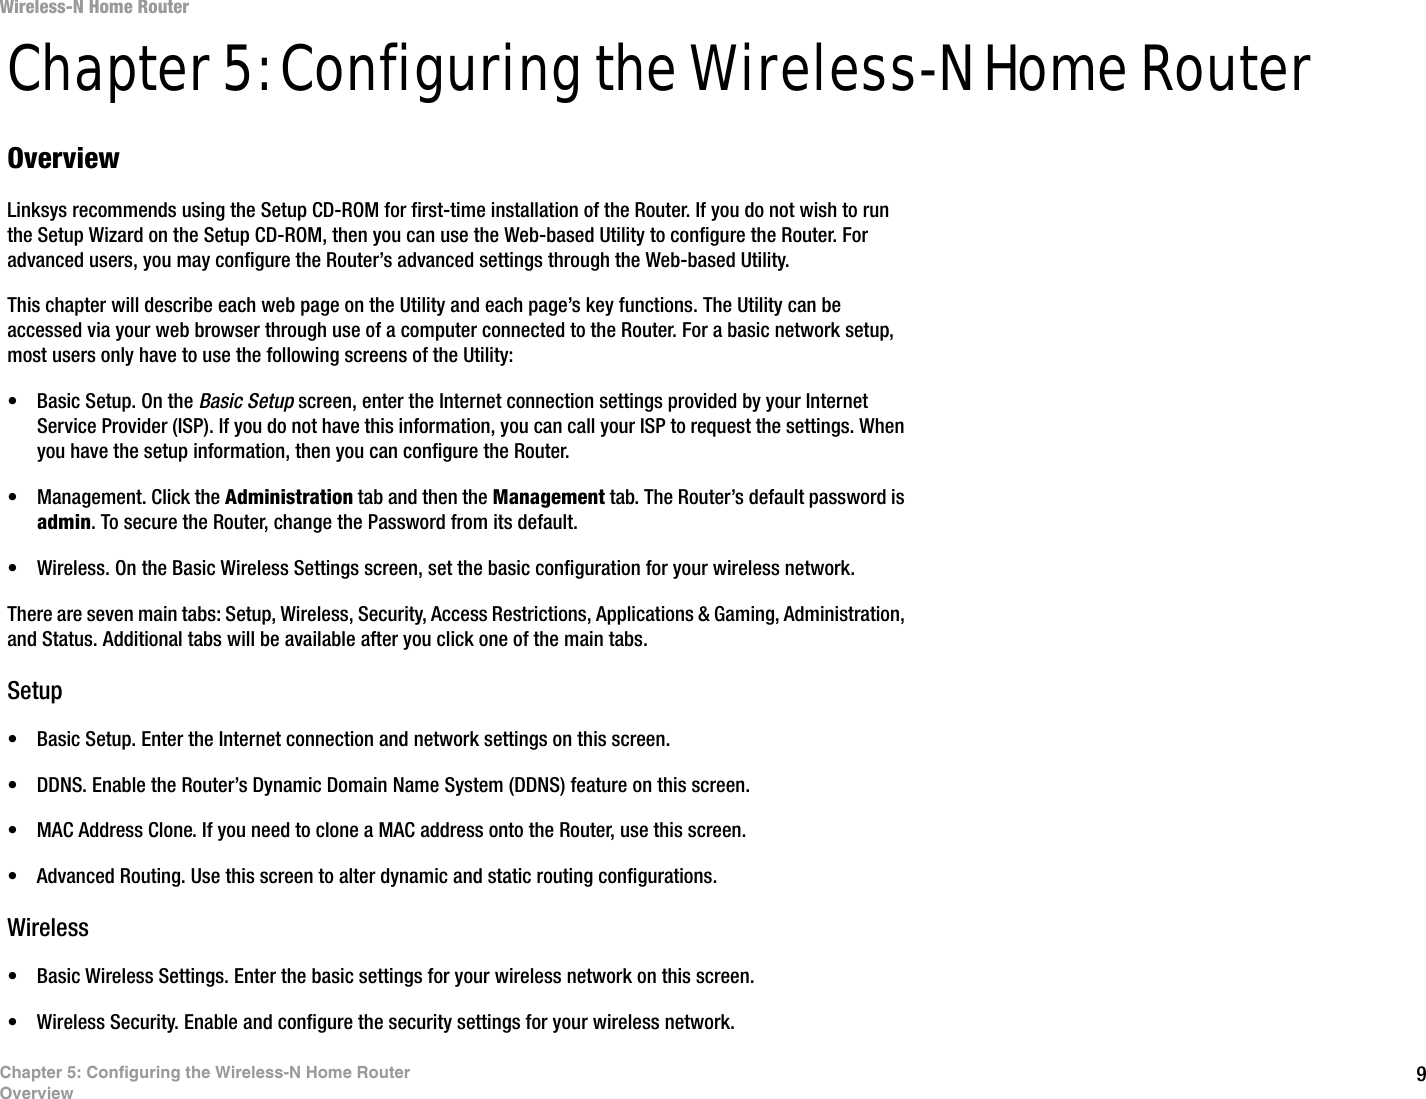 9Chapter 5: Configuring the Wireless-N Home RouterOverviewWireless-N Home RouterChapter 5: Configuring the Wireless-N Home RouterOverviewLinksys recommends using the Setup CD-ROM for first-time installation of the Router. If you do not wish to run the Setup Wizard on the Setup CD-ROM, then you can use the Web-based Utility to configure the Router. For advanced users, you may configure the Router’s advanced settings through the Web-based Utility.This chapter will describe each web page on the Utility and each page’s key functions. The Utility can be accessed via your web browser through use of a computer connected to the Router. For a basic network setup, most users only have to use the following screens of the Utility:• Basic Setup. On the Basic Setup screen, enter the Internet connection settings provided by your Internet Service Provider (ISP). If you do not have this information, you can call your ISP to request the settings. When you have the setup information, then you can configure the Router.• Management. Click the Administration tab and then the Management tab. The Router’s default password is admin. To secure the Router, change the Password from its default.• Wireless. On the Basic Wireless Settings screen, set the basic configuration for your wireless network.There are seven main tabs: Setup, Wireless, Security, Access Restrictions, Applications &amp; Gaming, Administration, and Status. Additional tabs will be available after you click one of the main tabs.Setup• Basic Setup. Enter the Internet connection and network settings on this screen.• DDNS. Enable the Router’s Dynamic Domain Name System (DDNS) feature on this screen.• MAC Address Clone. If you need to clone a MAC address onto the Router, use this screen.• Advanced Routing. Use this screen to alter dynamic and static routing configurations.Wireless• Basic Wireless Settings. Enter the basic settings for your wireless network on this screen.• Wireless Security. Enable and configure the security settings for your wireless network.